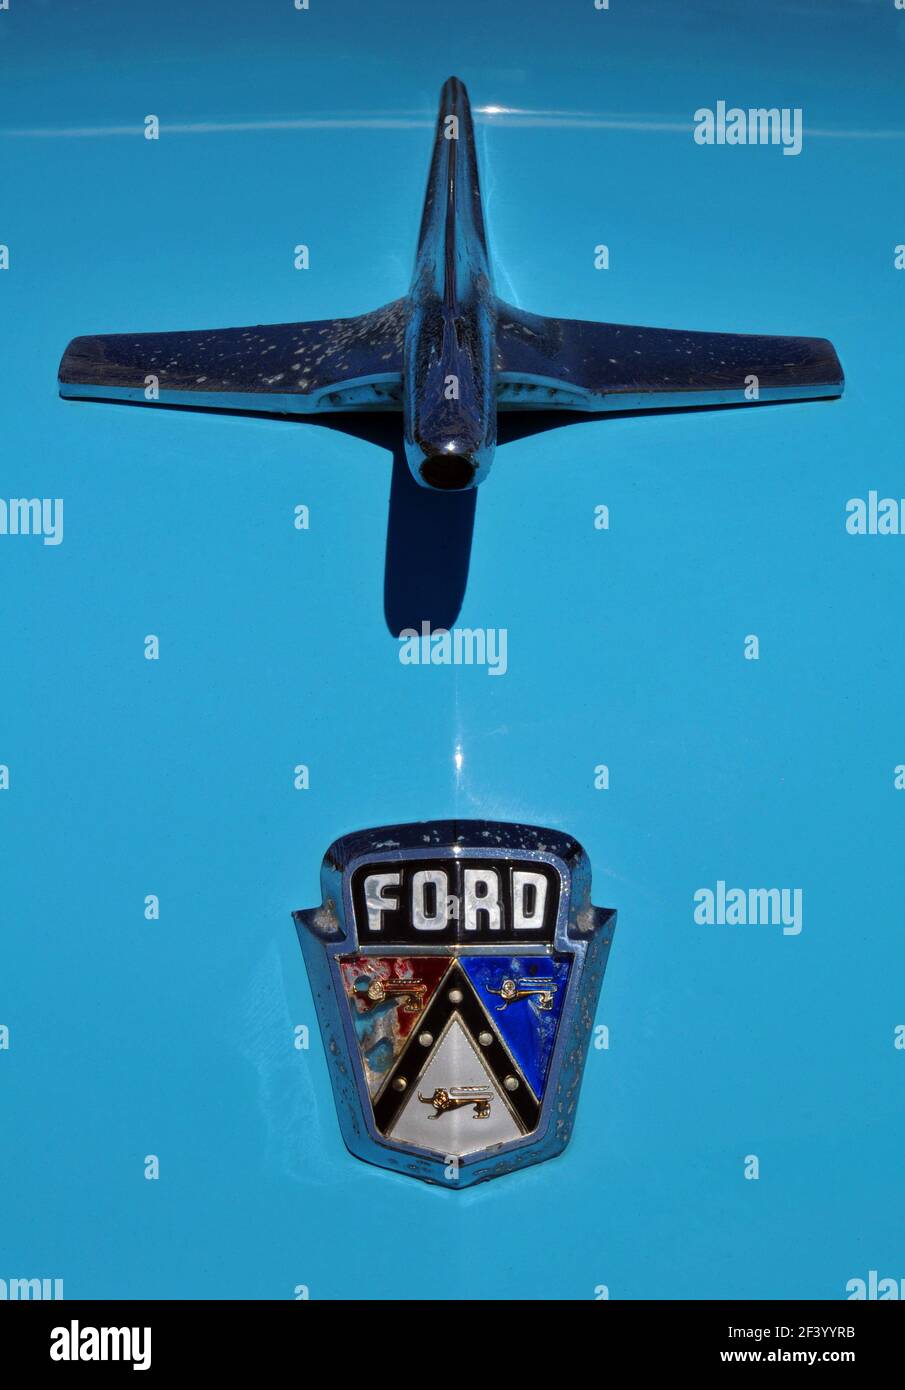 The emblem and hood ornament on a classic blue Ford Customline automobile. Stock Photo